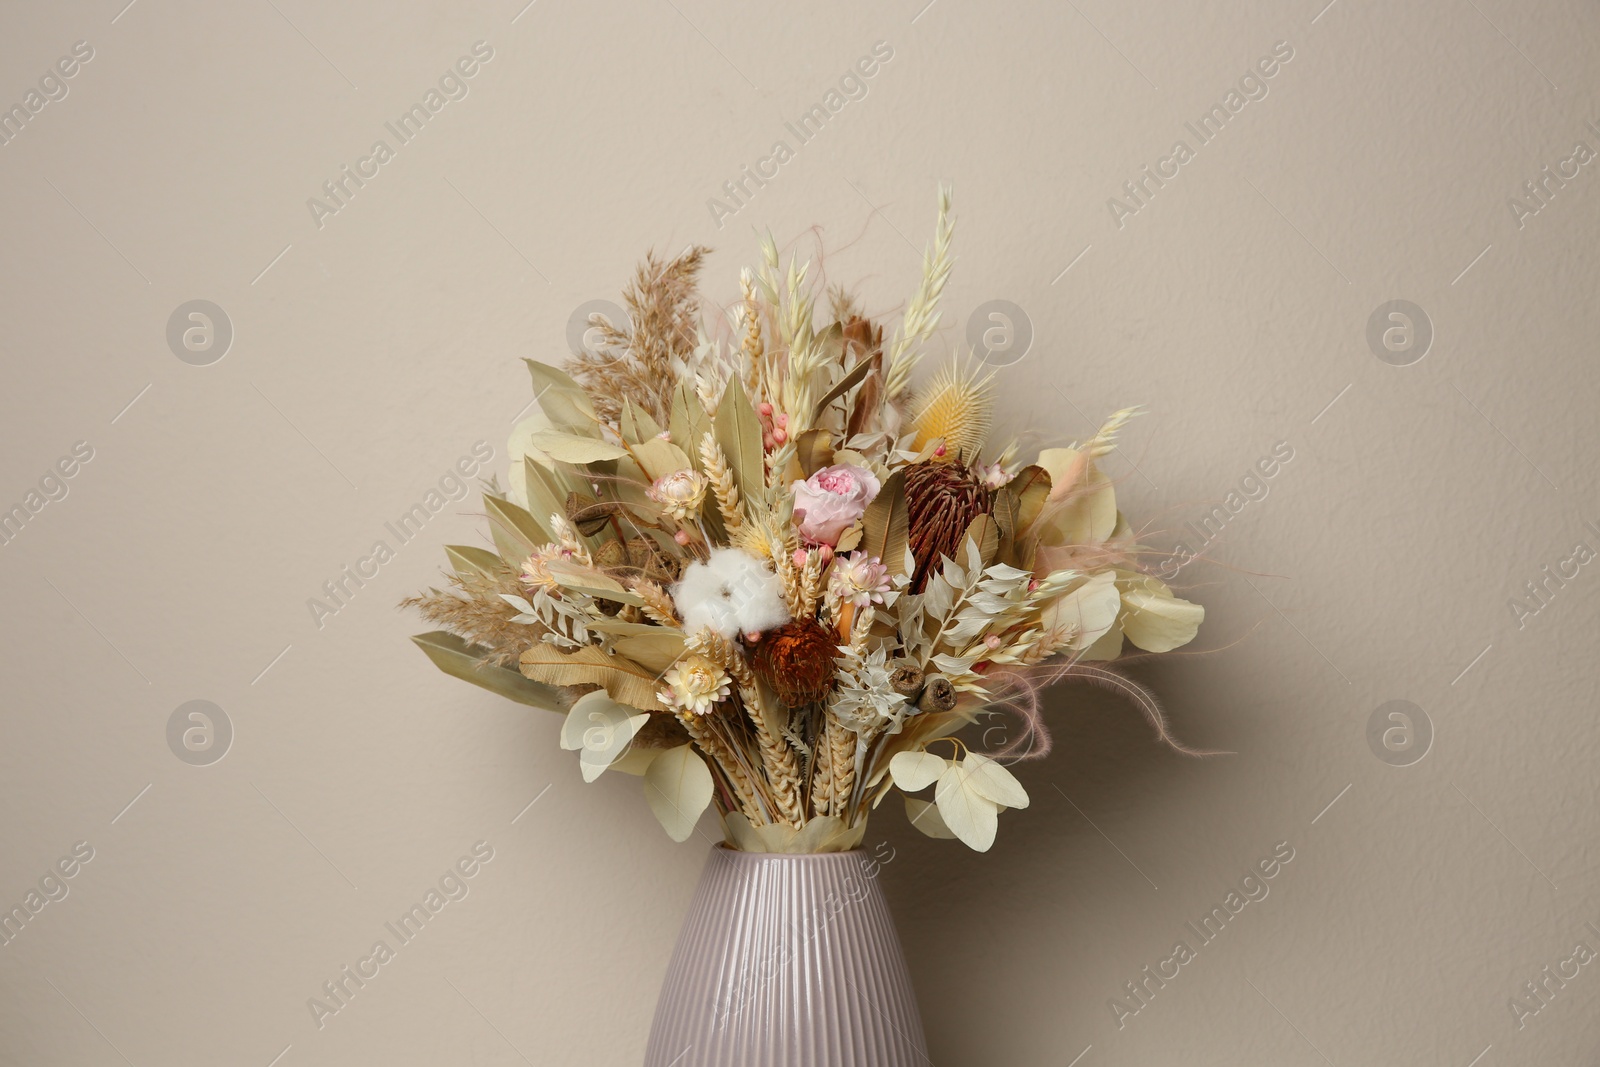 Photo of Beautiful dried flower bouquet in ceramic vase against light grey background